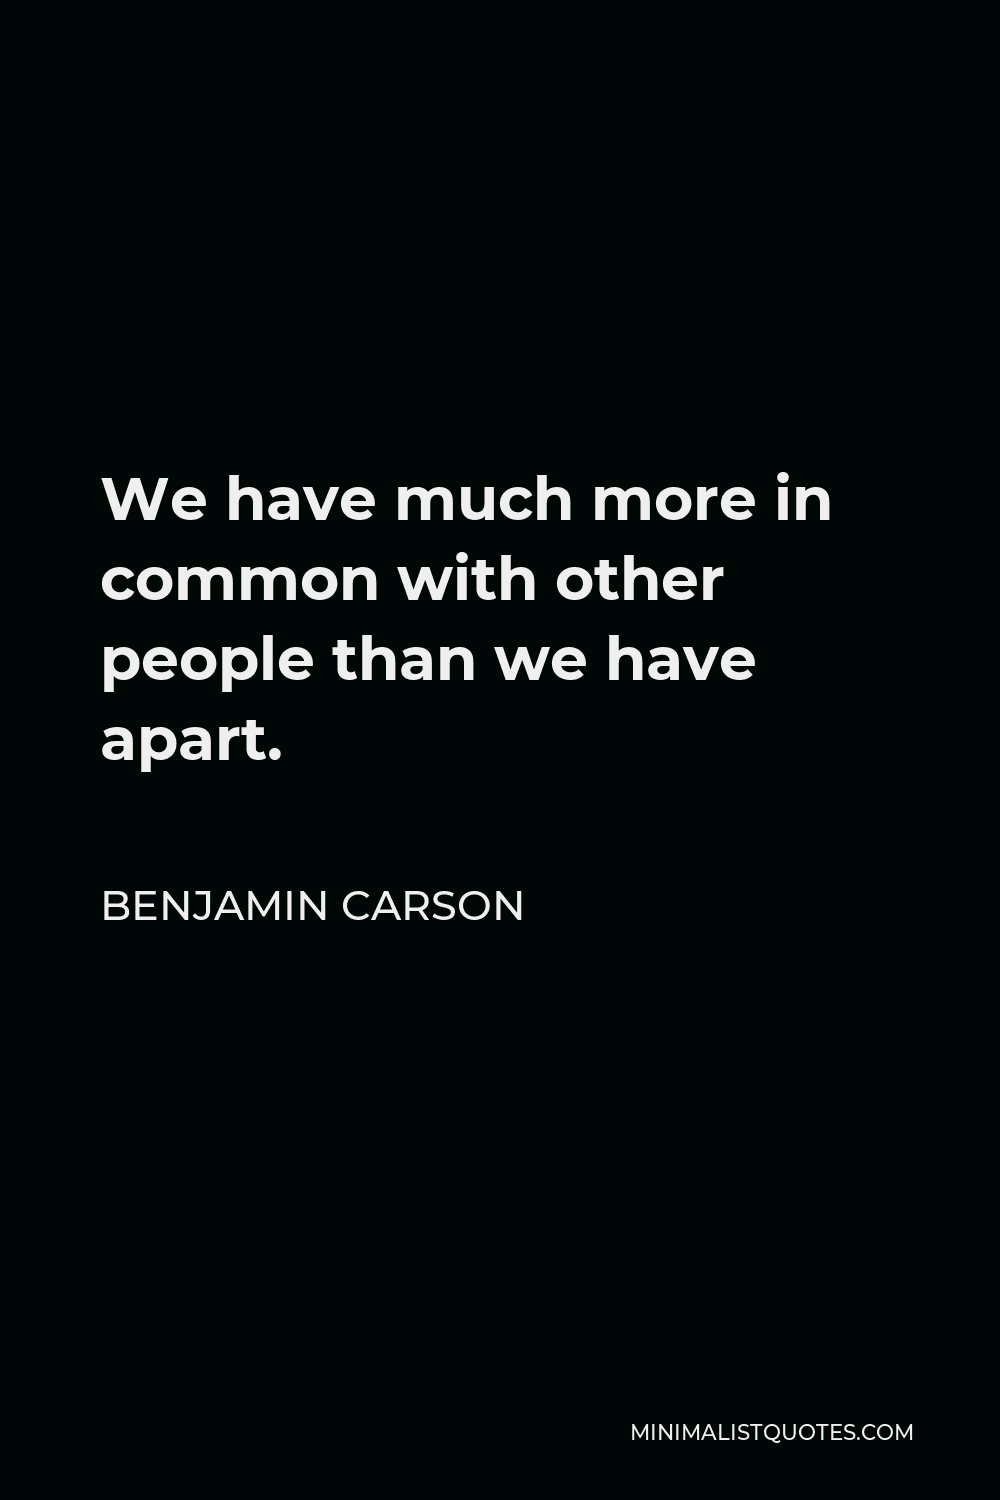 Benjamin Carson Quote - We have much more in common with other people than we have apart.